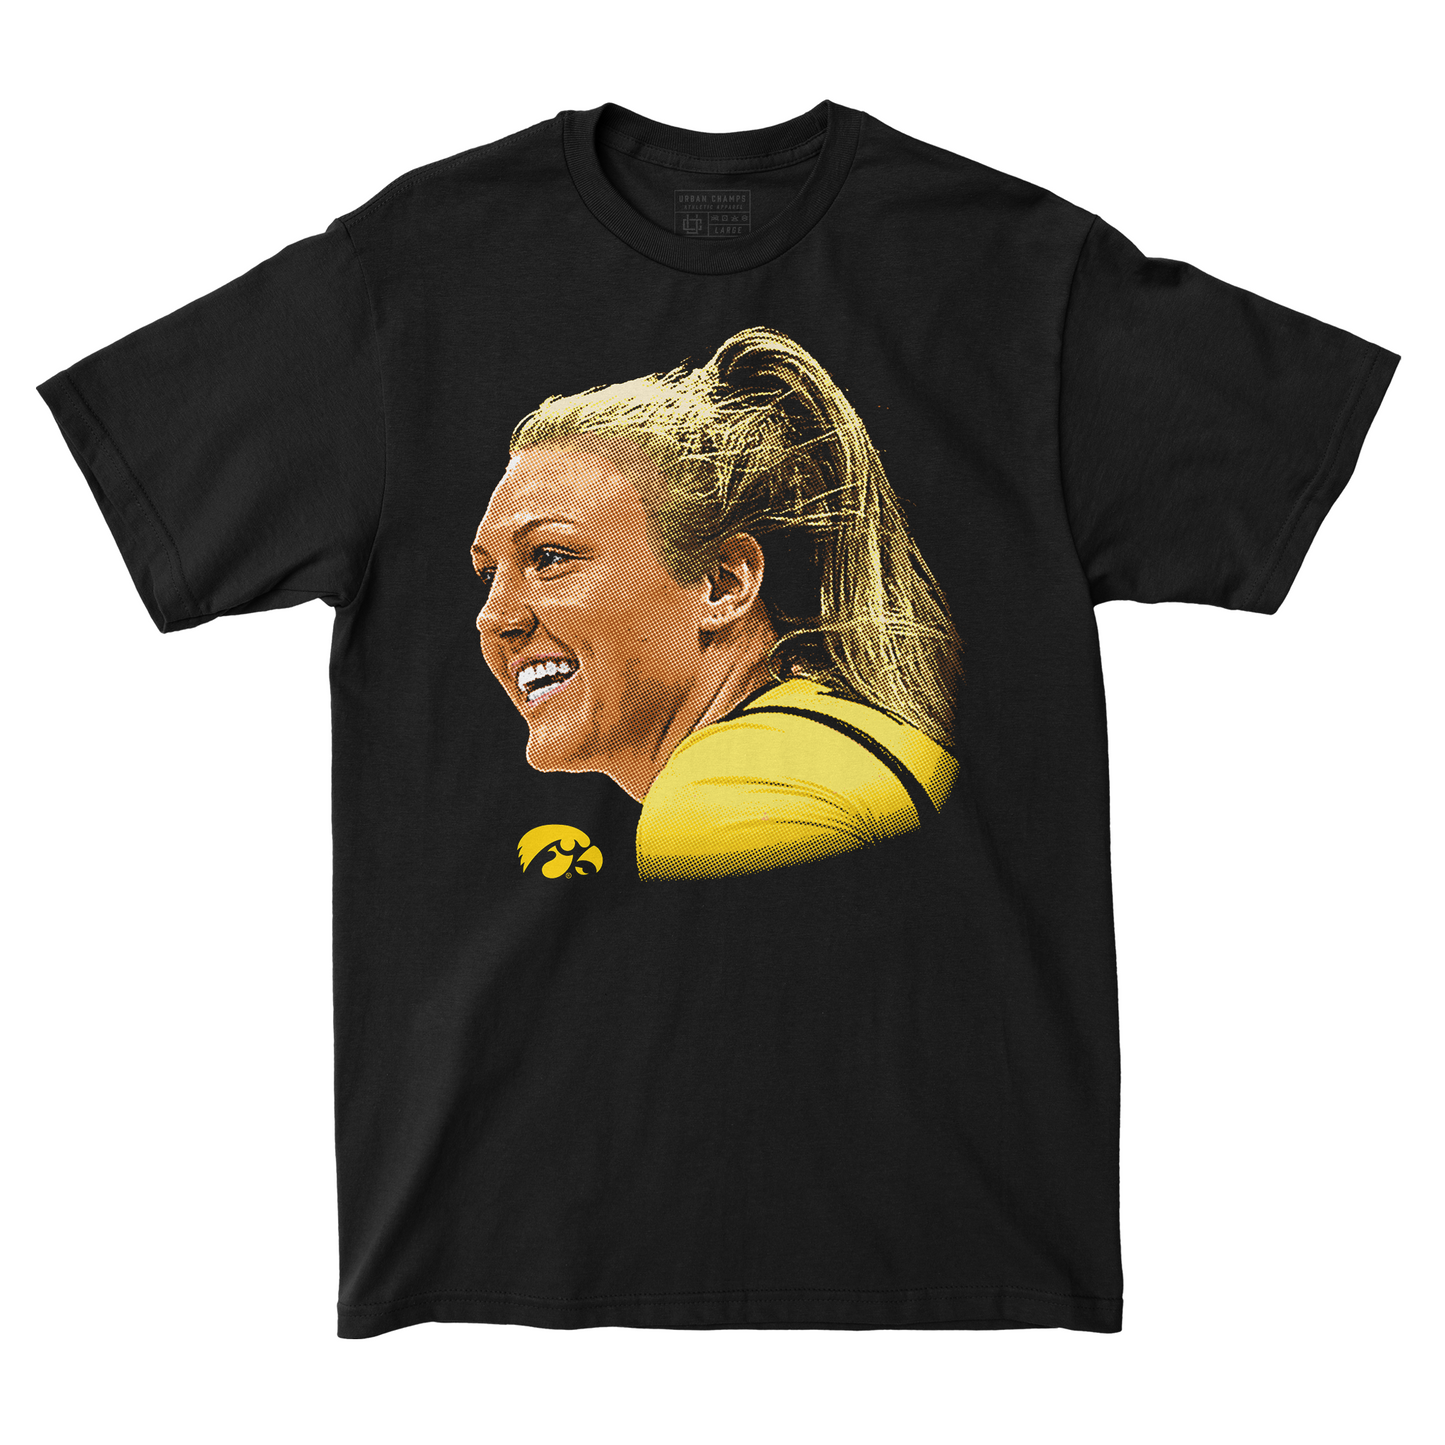 EXCLUSIVE RELEASE: Sydney Affolter Portrait Tee